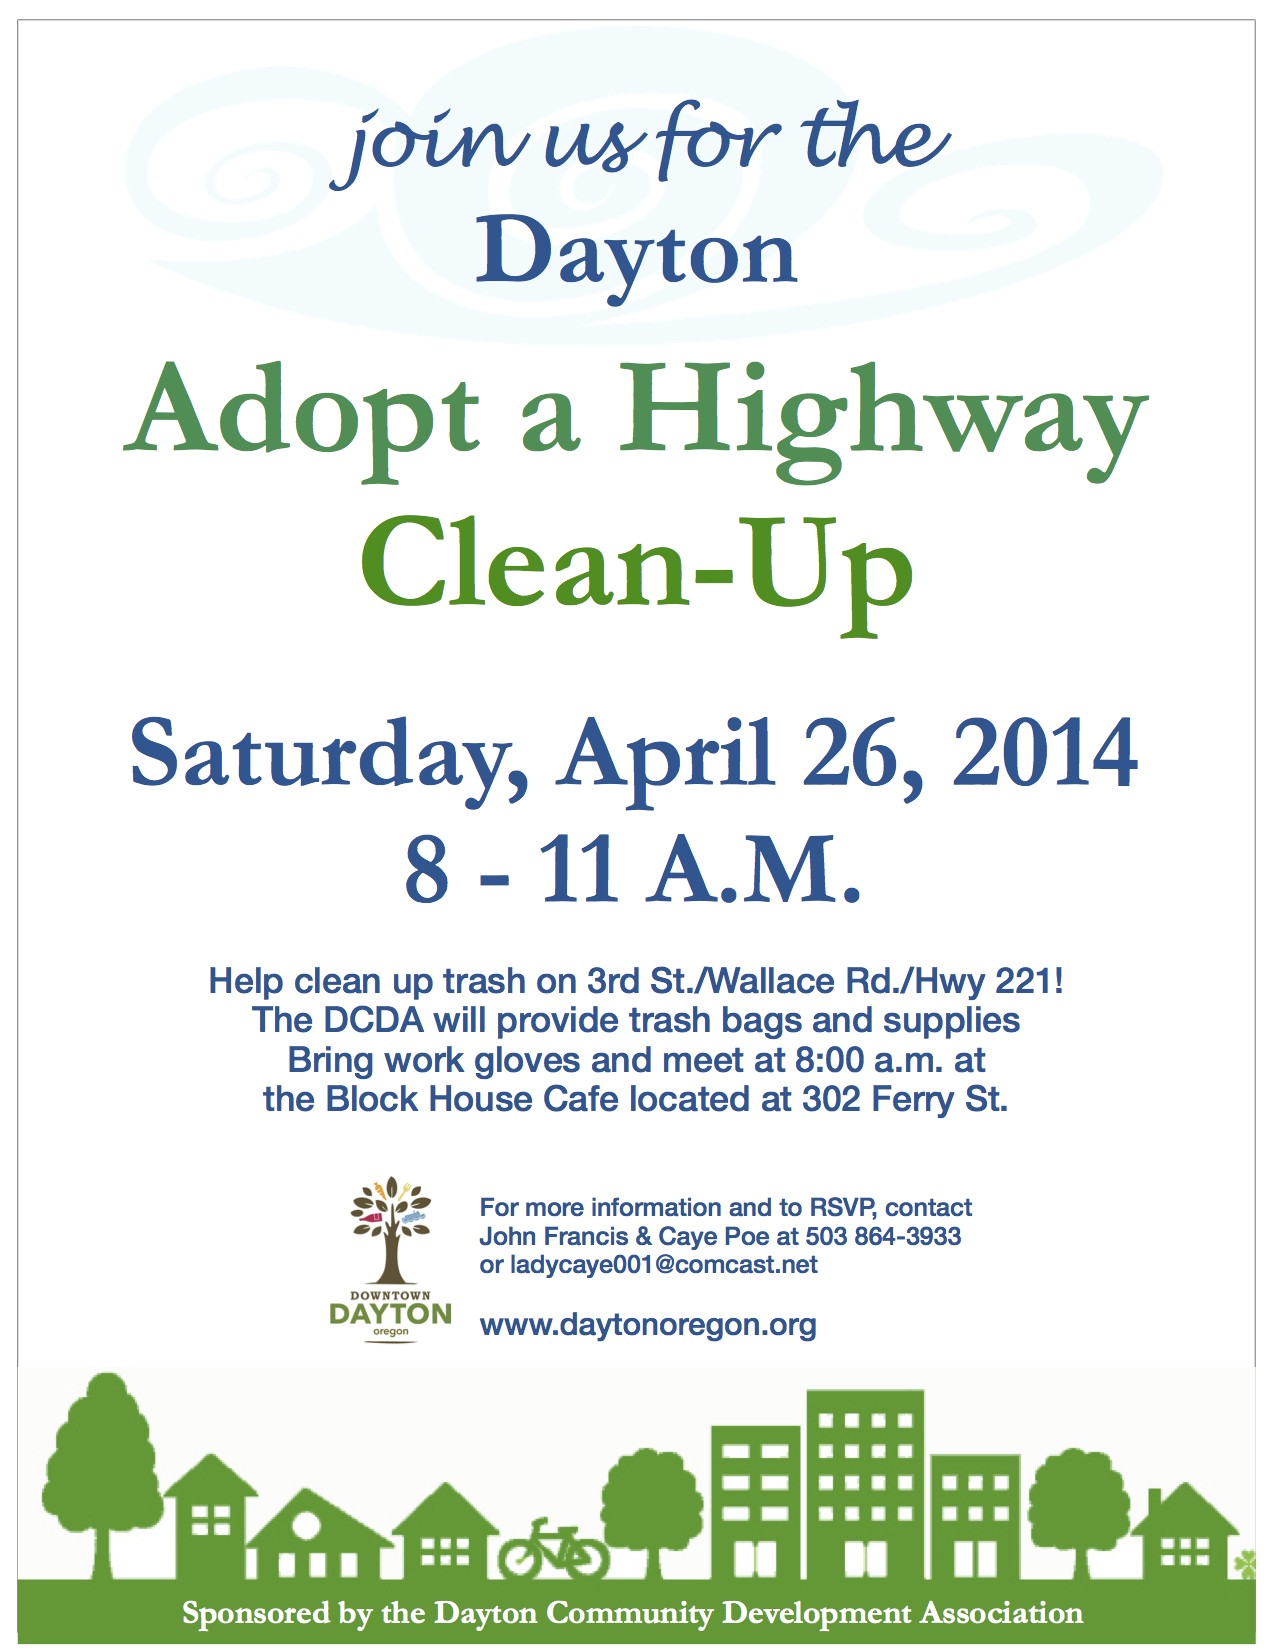 Adopt a Highway Clean Up flyer